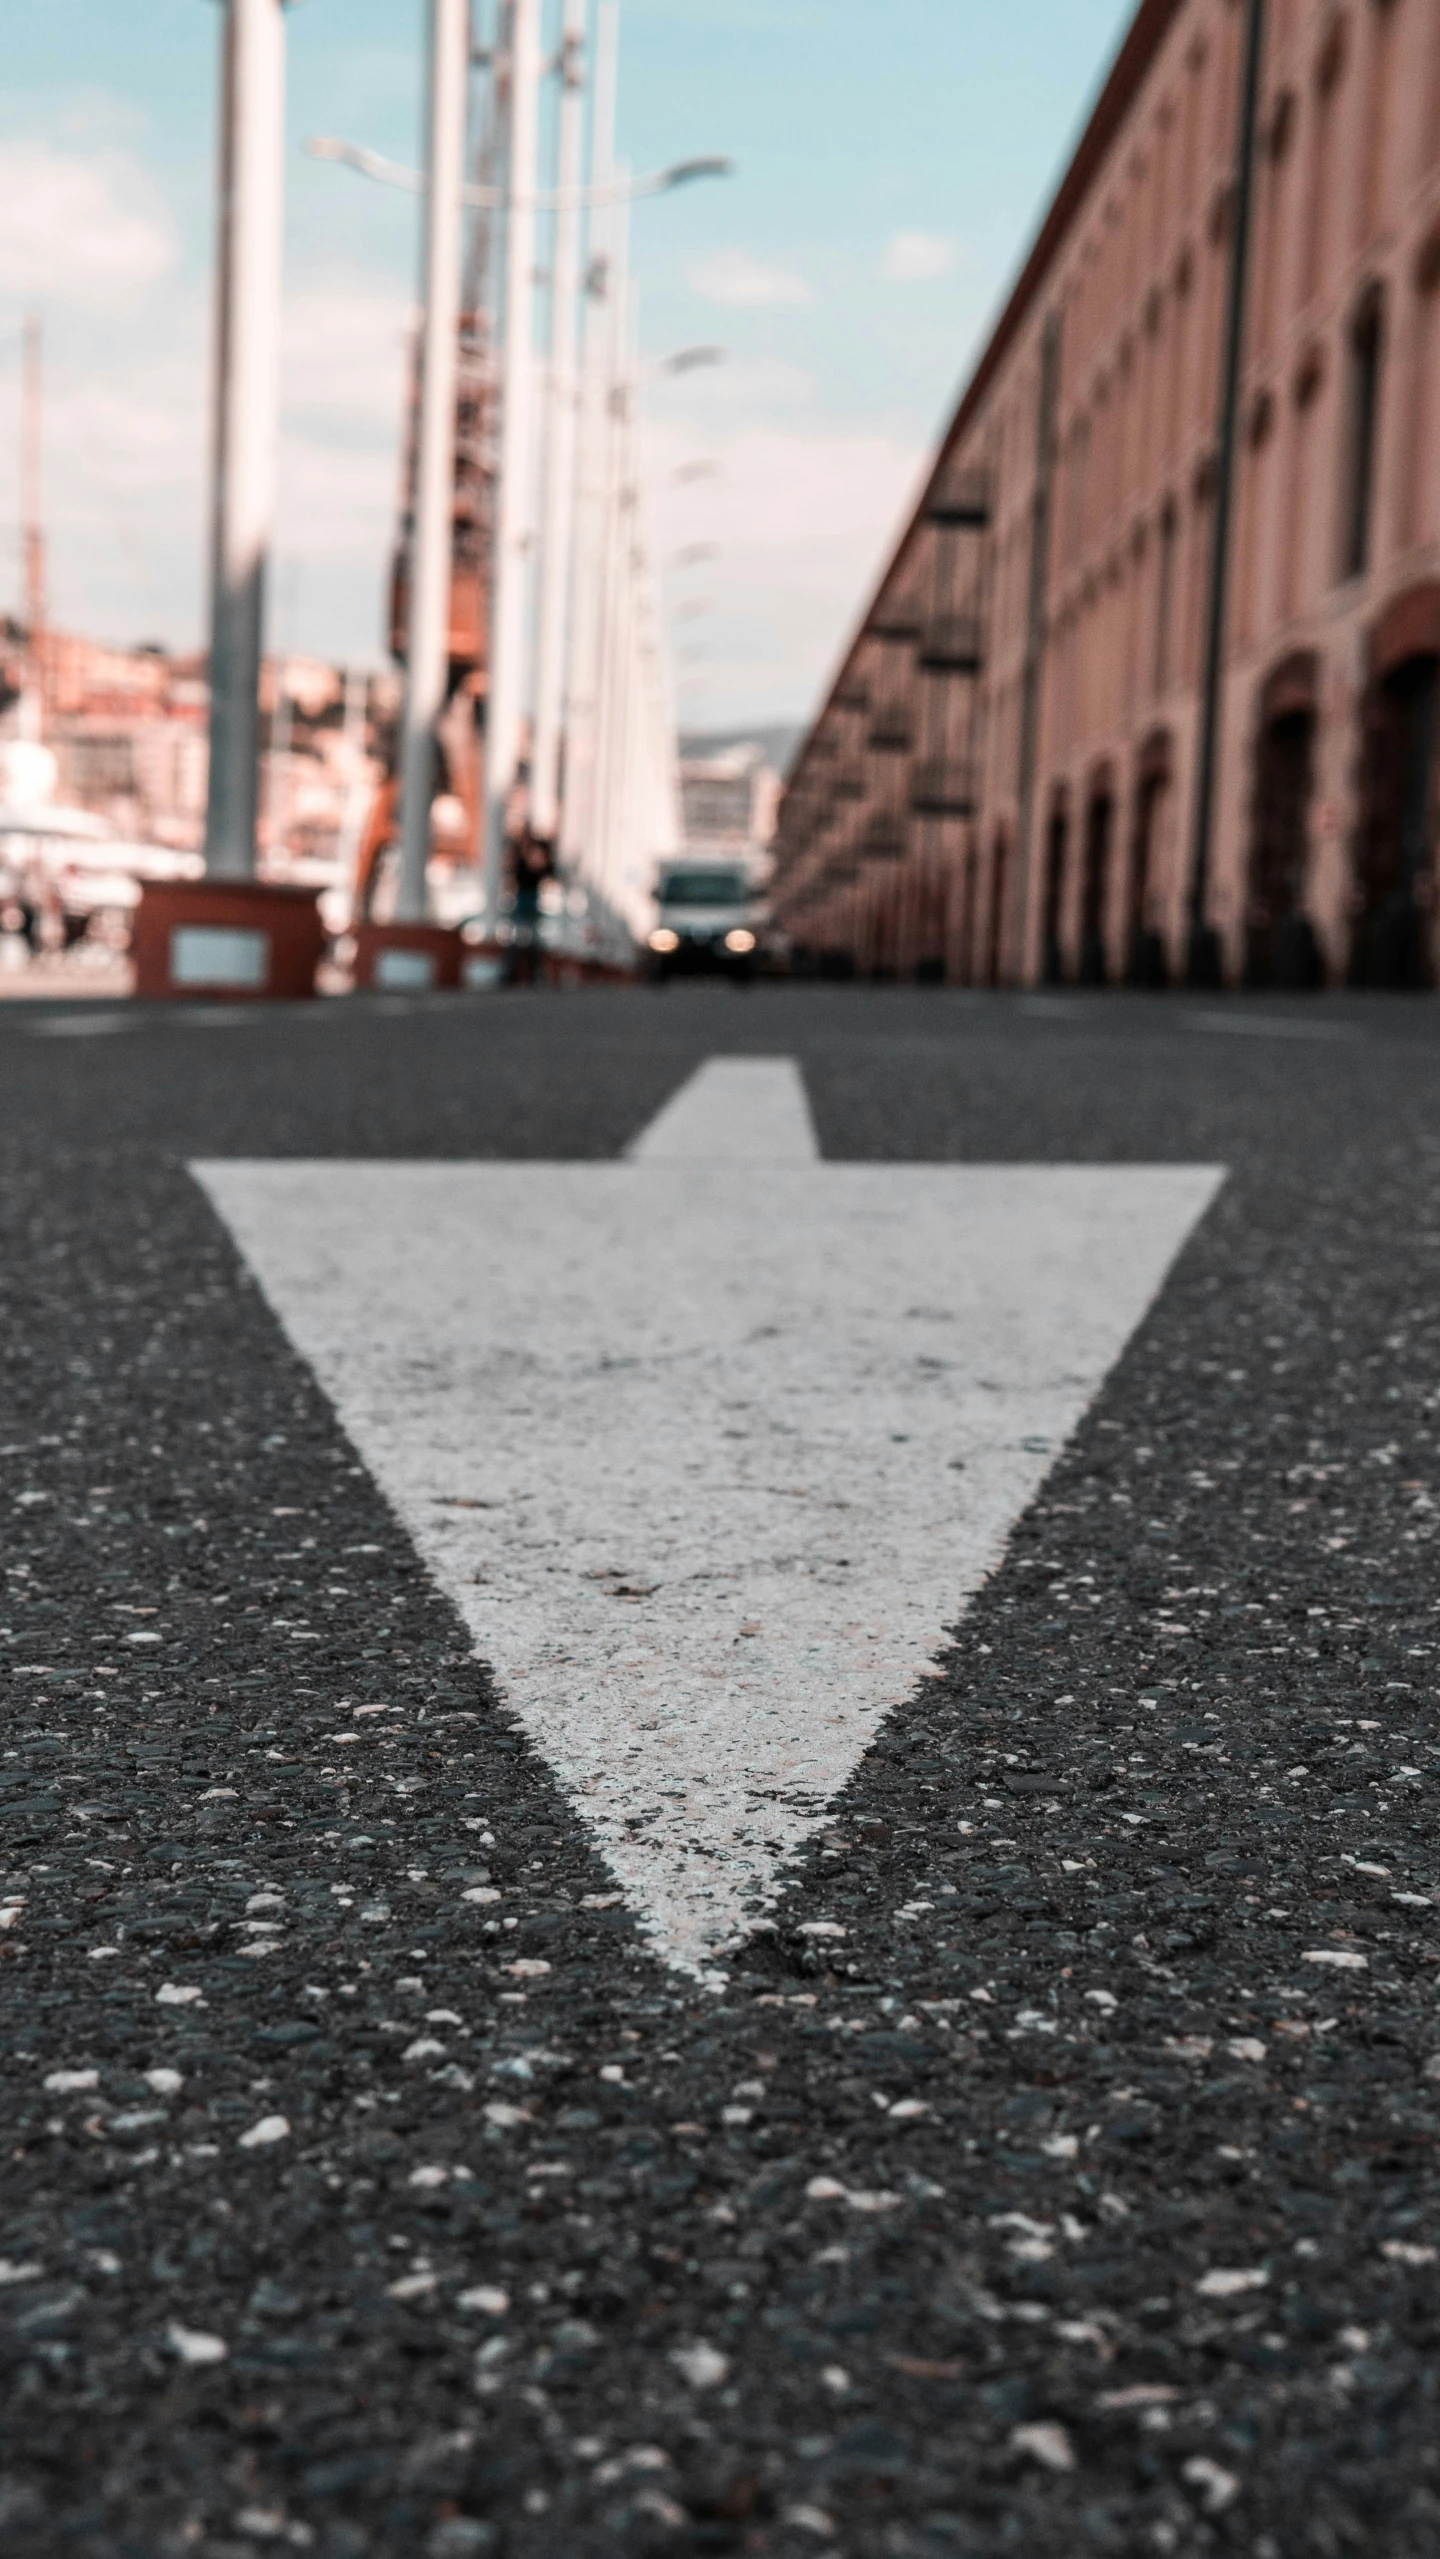 an arrow on the asphalt showing which way to go